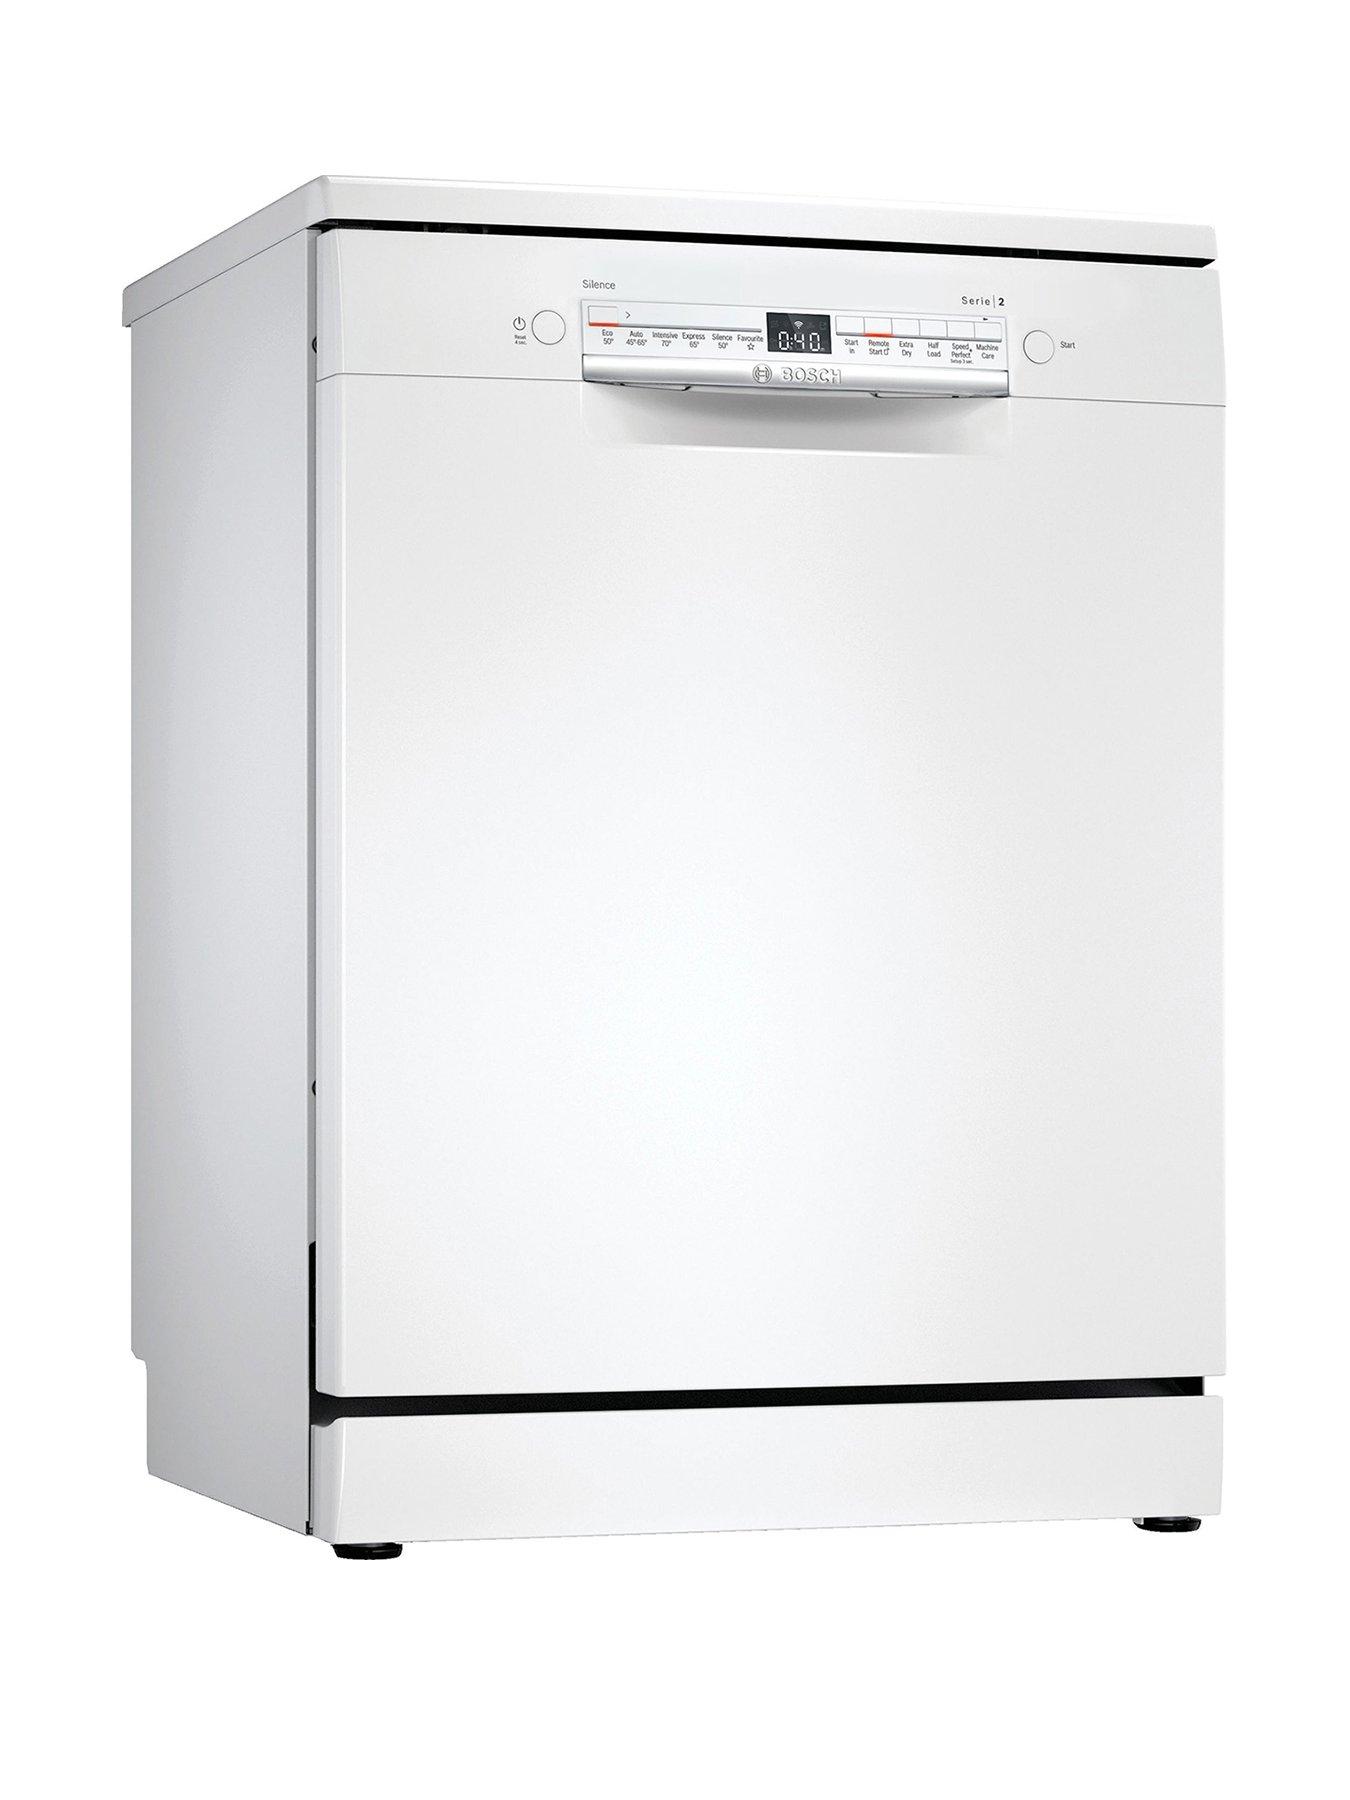 Less than 85cms, Dishwashers, Electricals